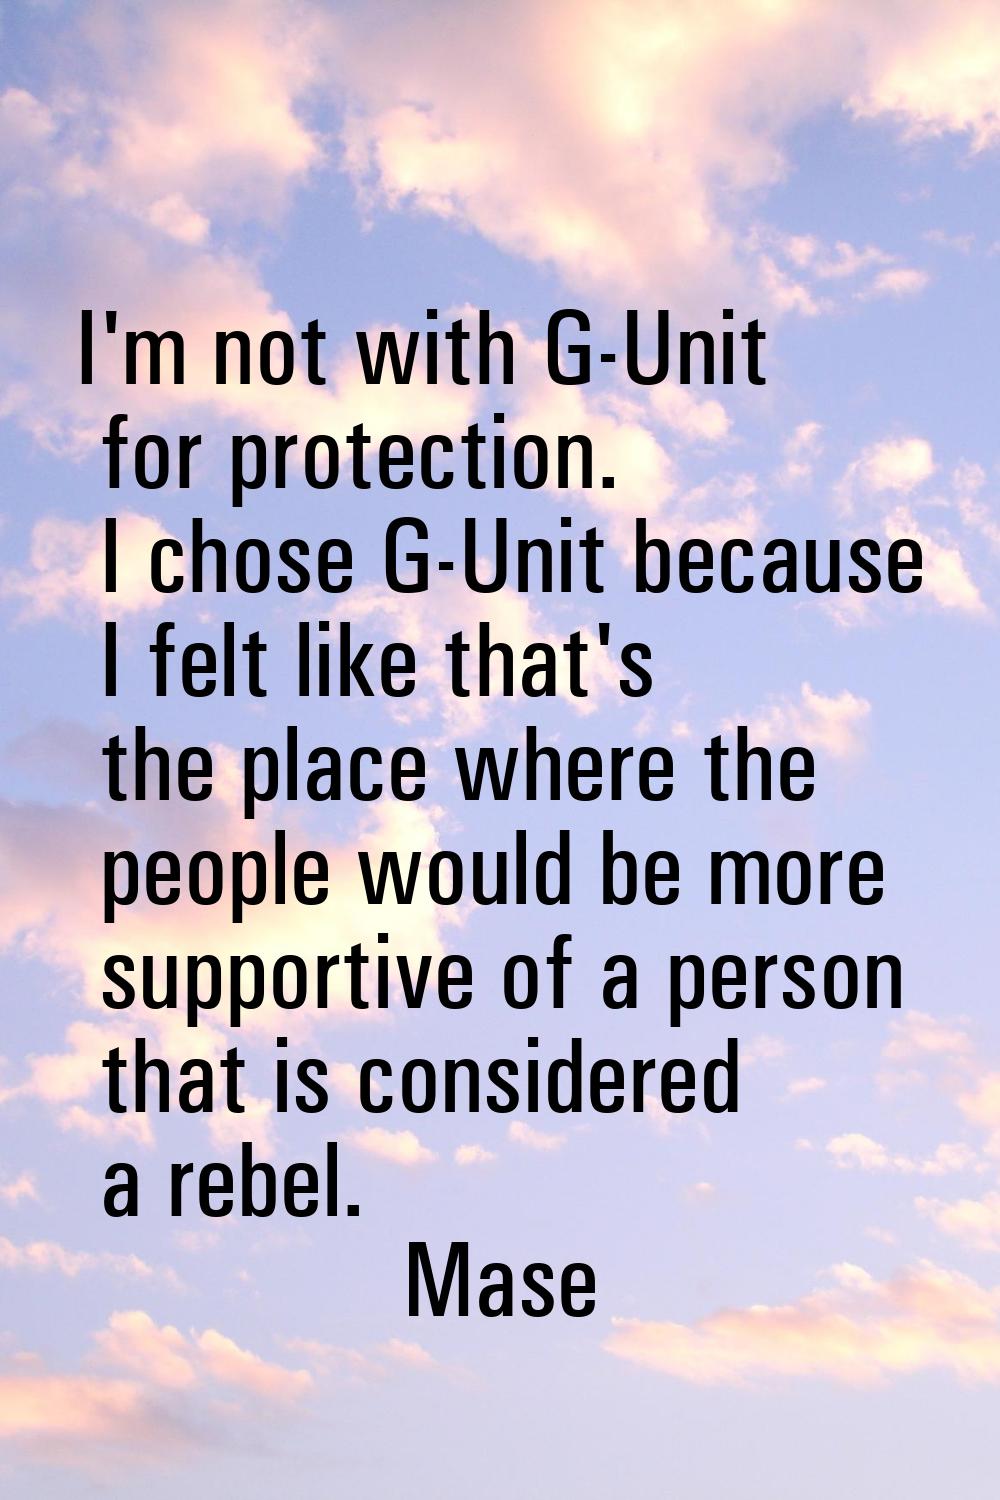 I'm not with G-Unit for protection. I chose G-Unit because I felt like that's the place where the p